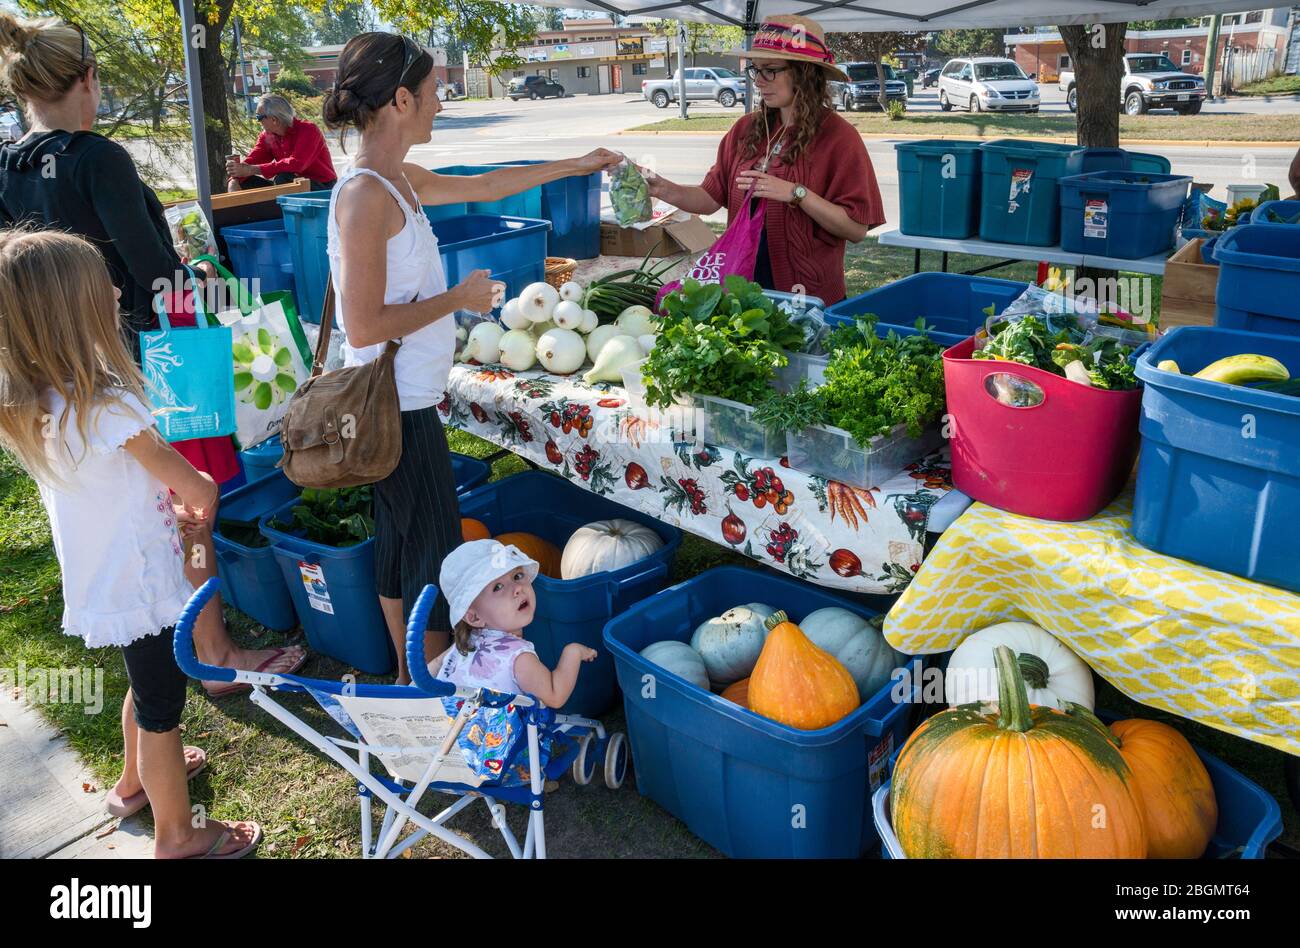 Vegetable stall at farmers market in Golden, British Columbia, Canada Stock Photo